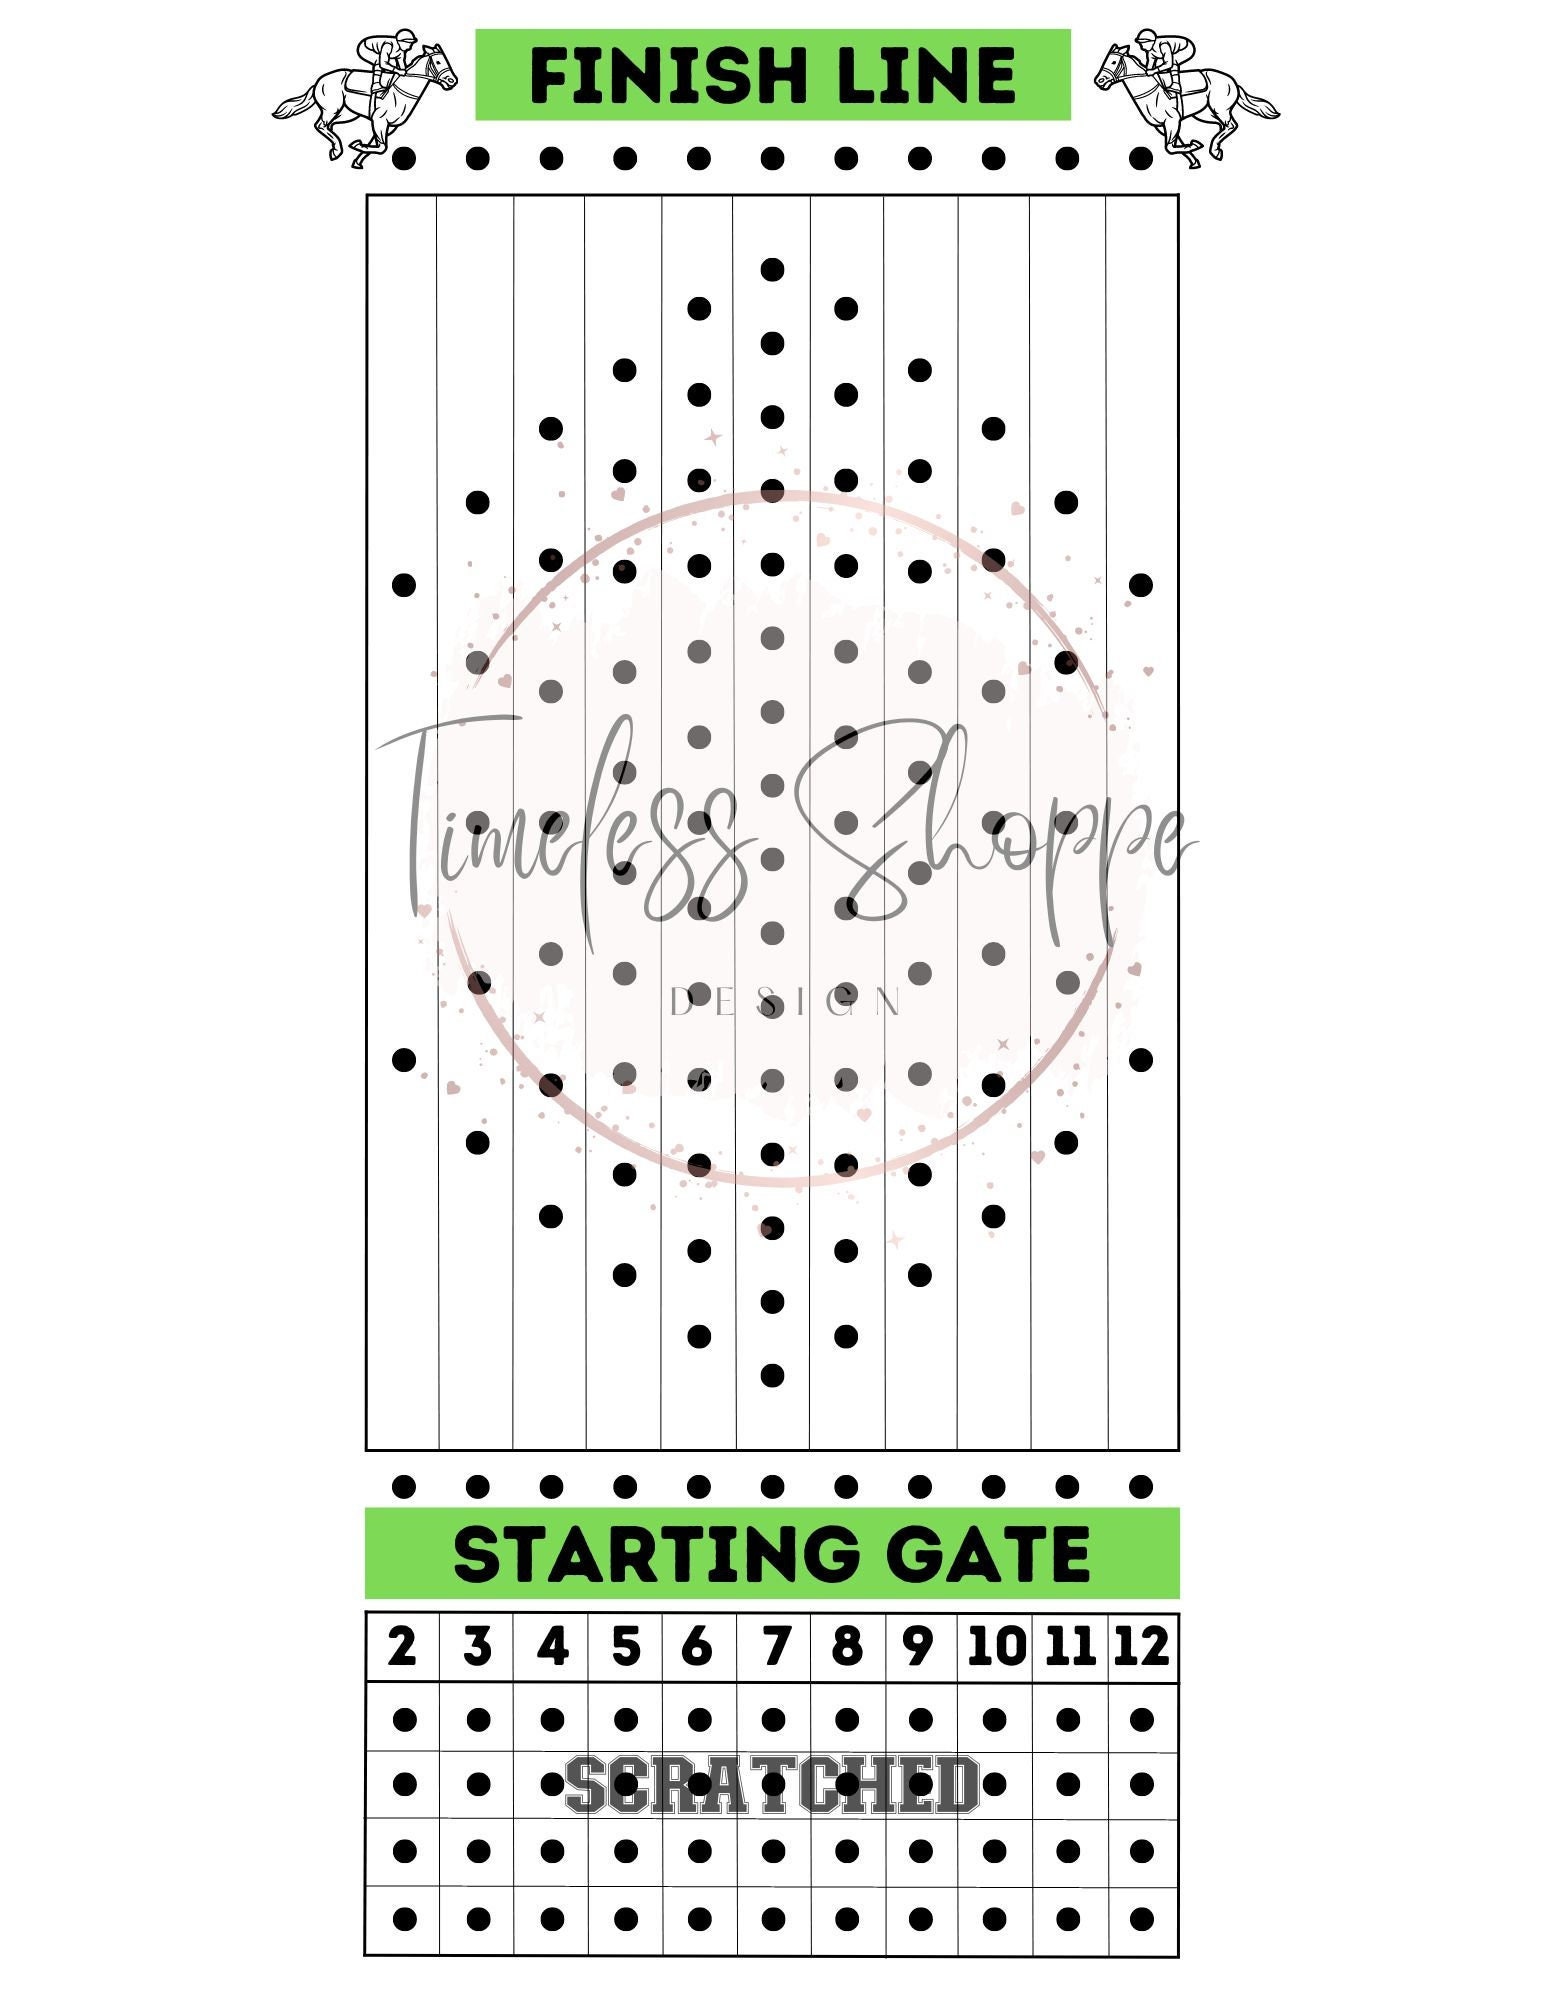 Horse Race Dice Game Template, Horse Race Dice Game, Horse Race Game ...